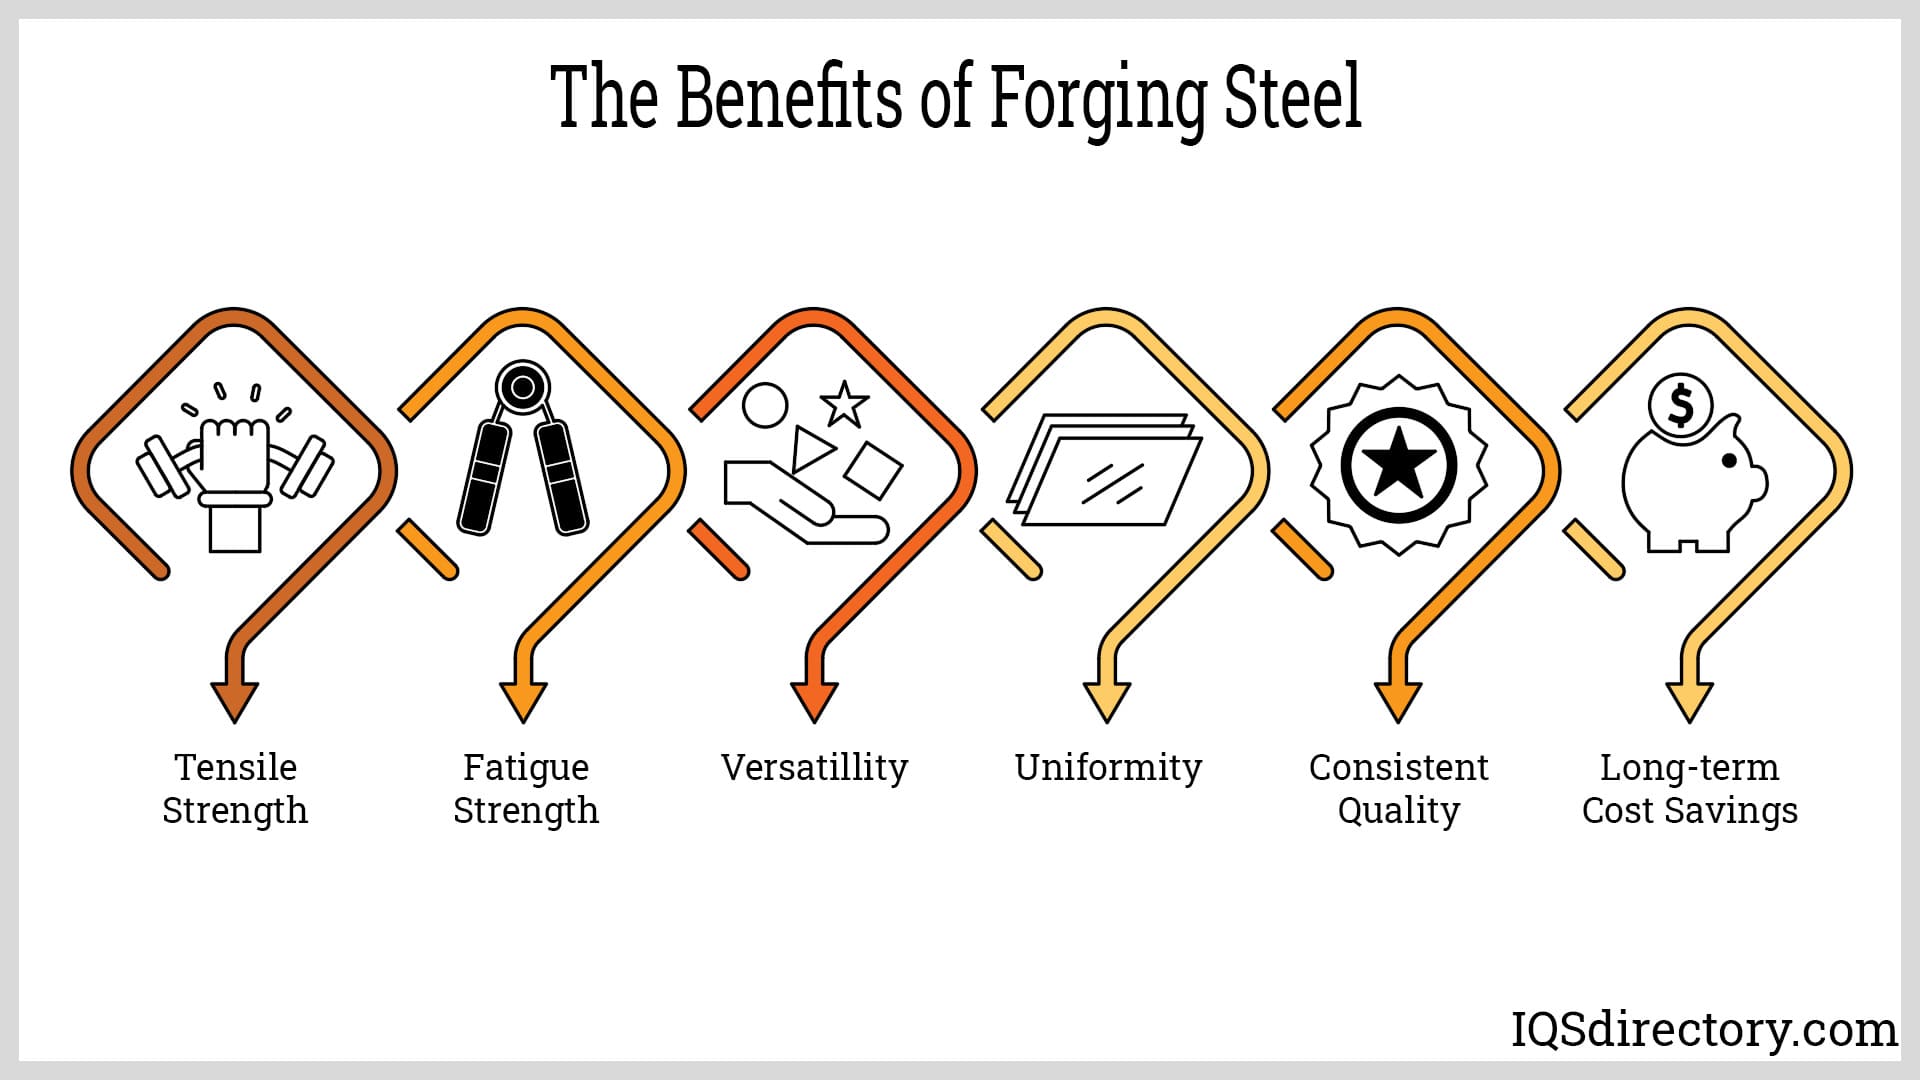 The Benefits of Forging Steel